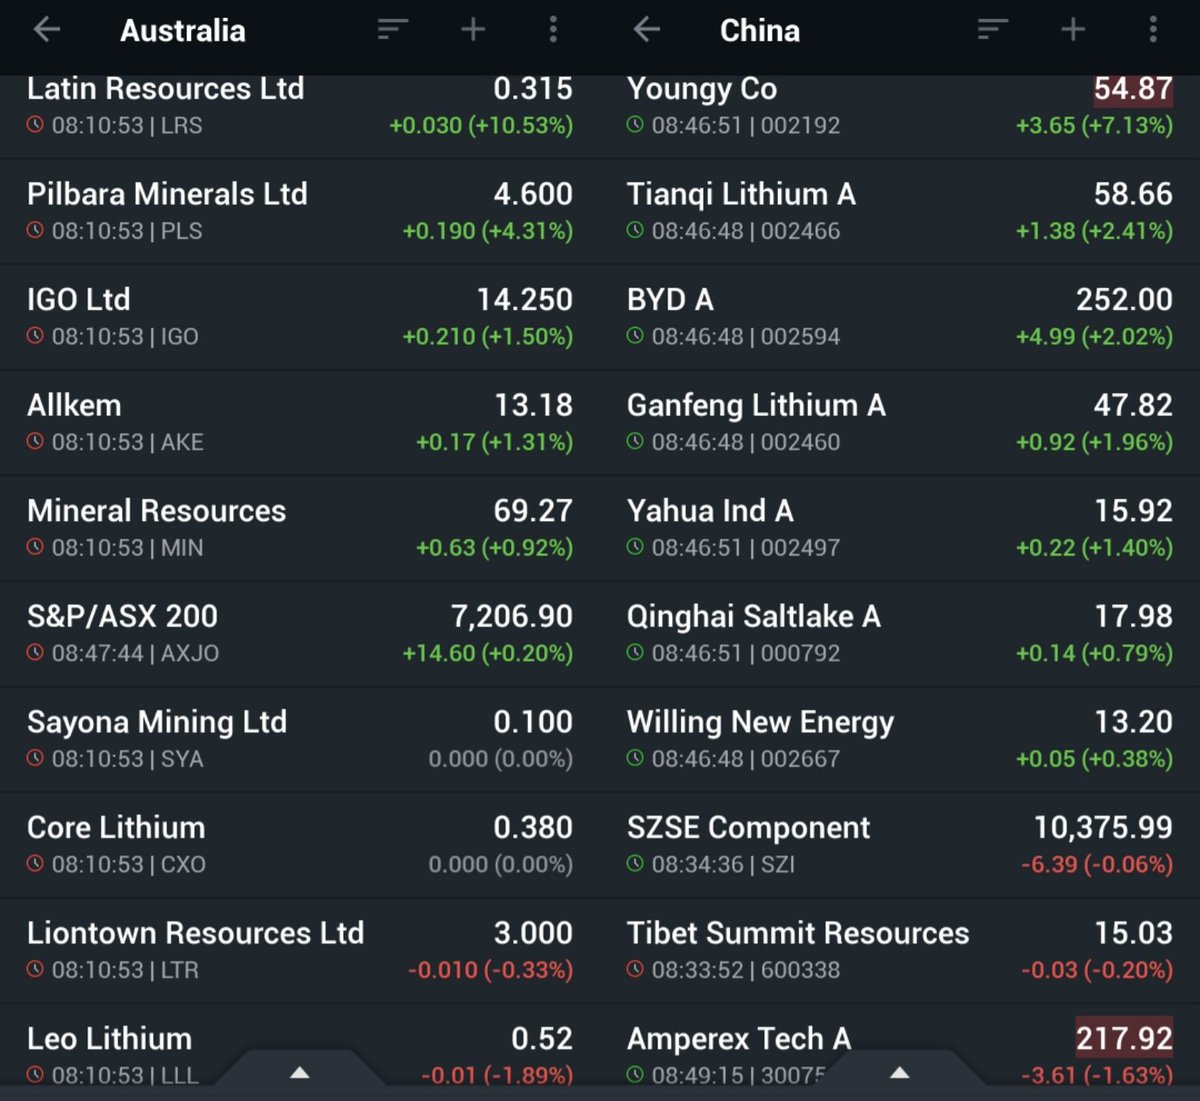 ASX #lithiumstocks are mostly in green, while $LRS had the largest gain by 10% among top peers after yesterday's slump by 8%. Chinese peers go up, as Chinese lithium futures grew today anticipating a near pivot in lithium prices.
#asxstocks #chinesestocks